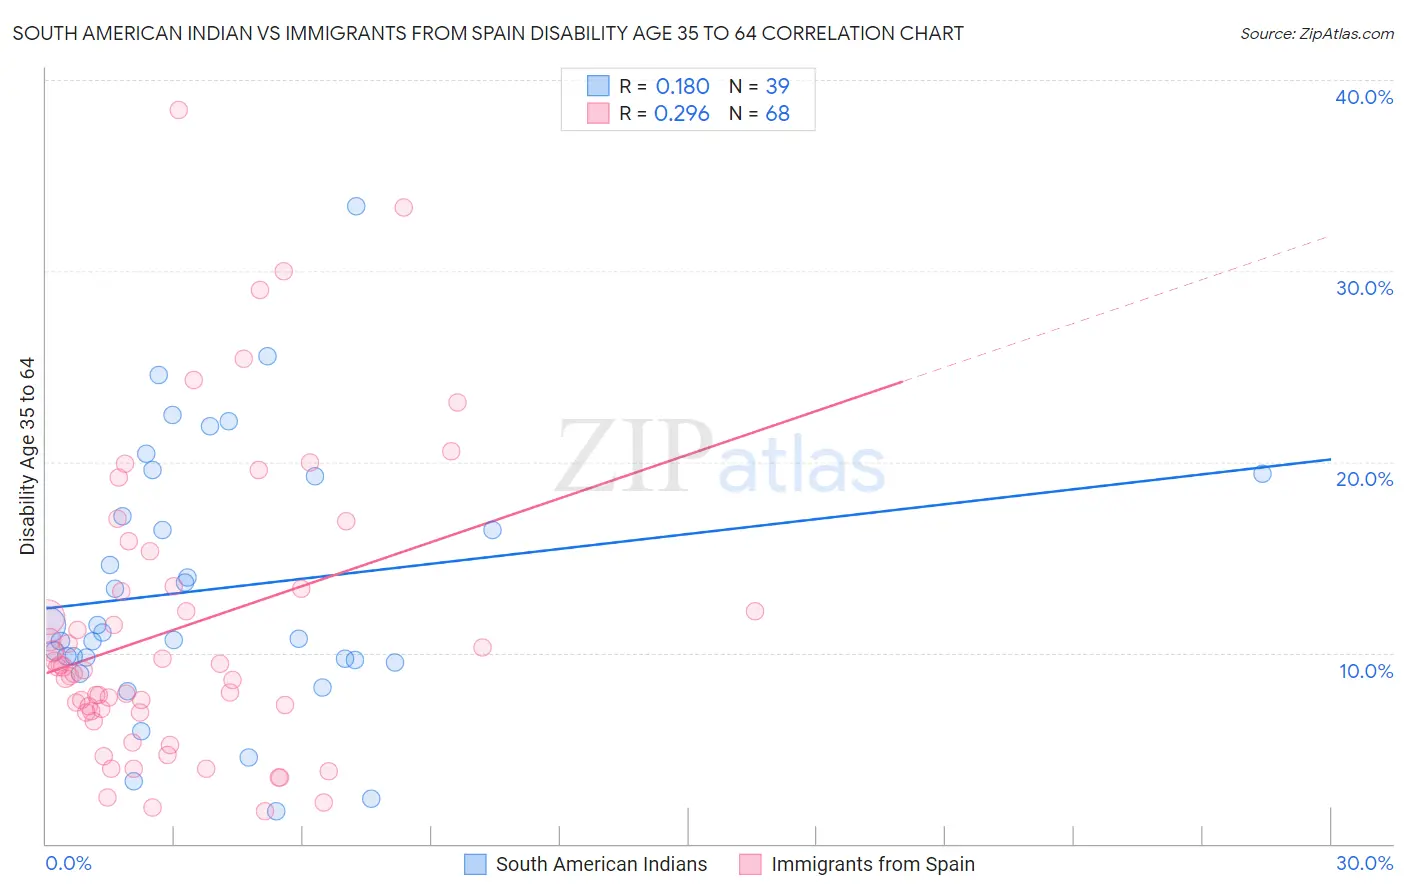 South American Indian vs Immigrants from Spain Disability Age 35 to 64